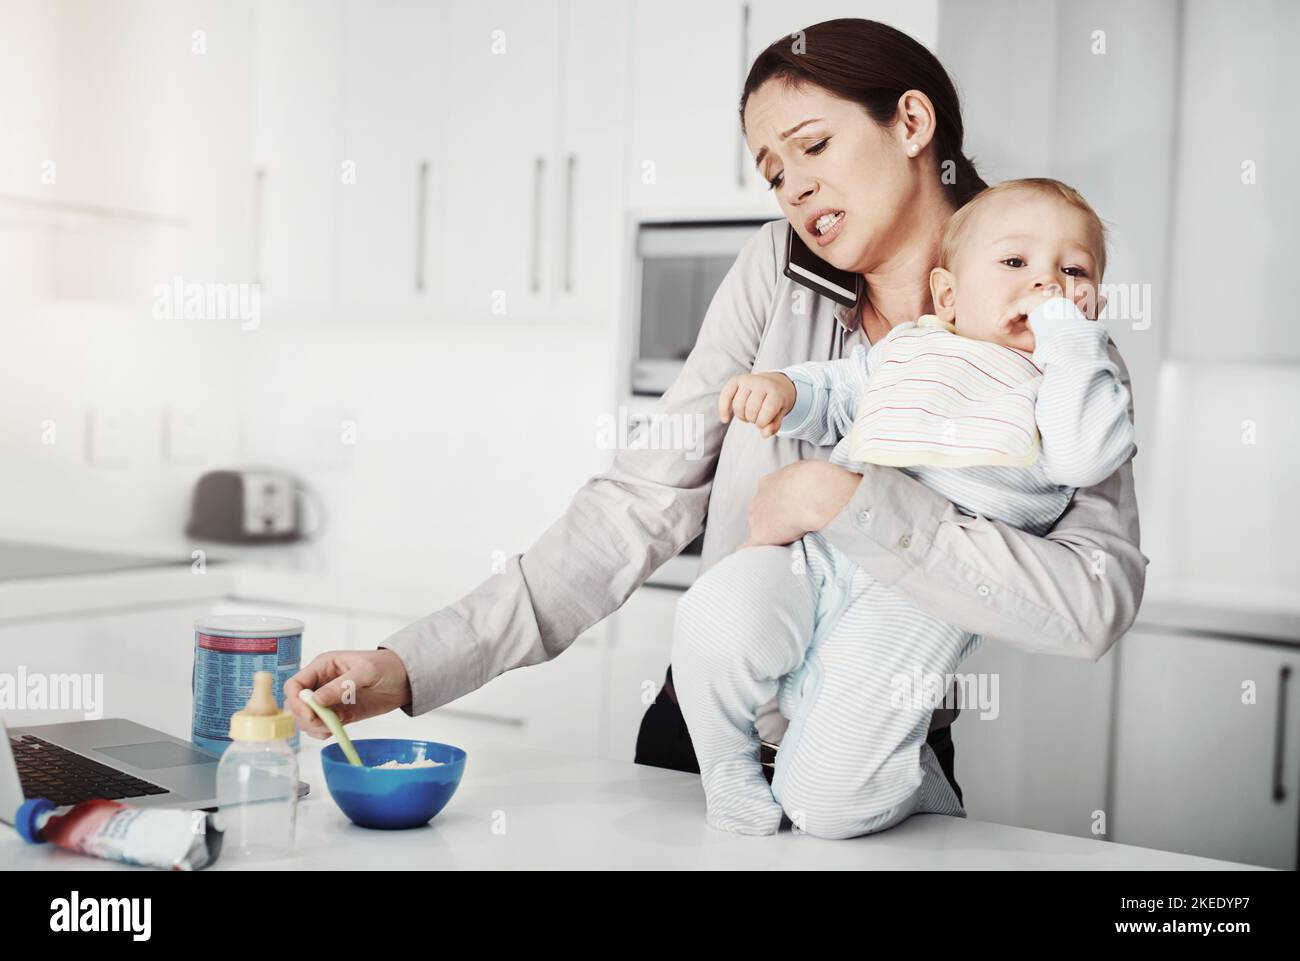 Its always a rush in the morning. an overwhelmed mother trying to multitask while holding her baby boy. Stock Photo